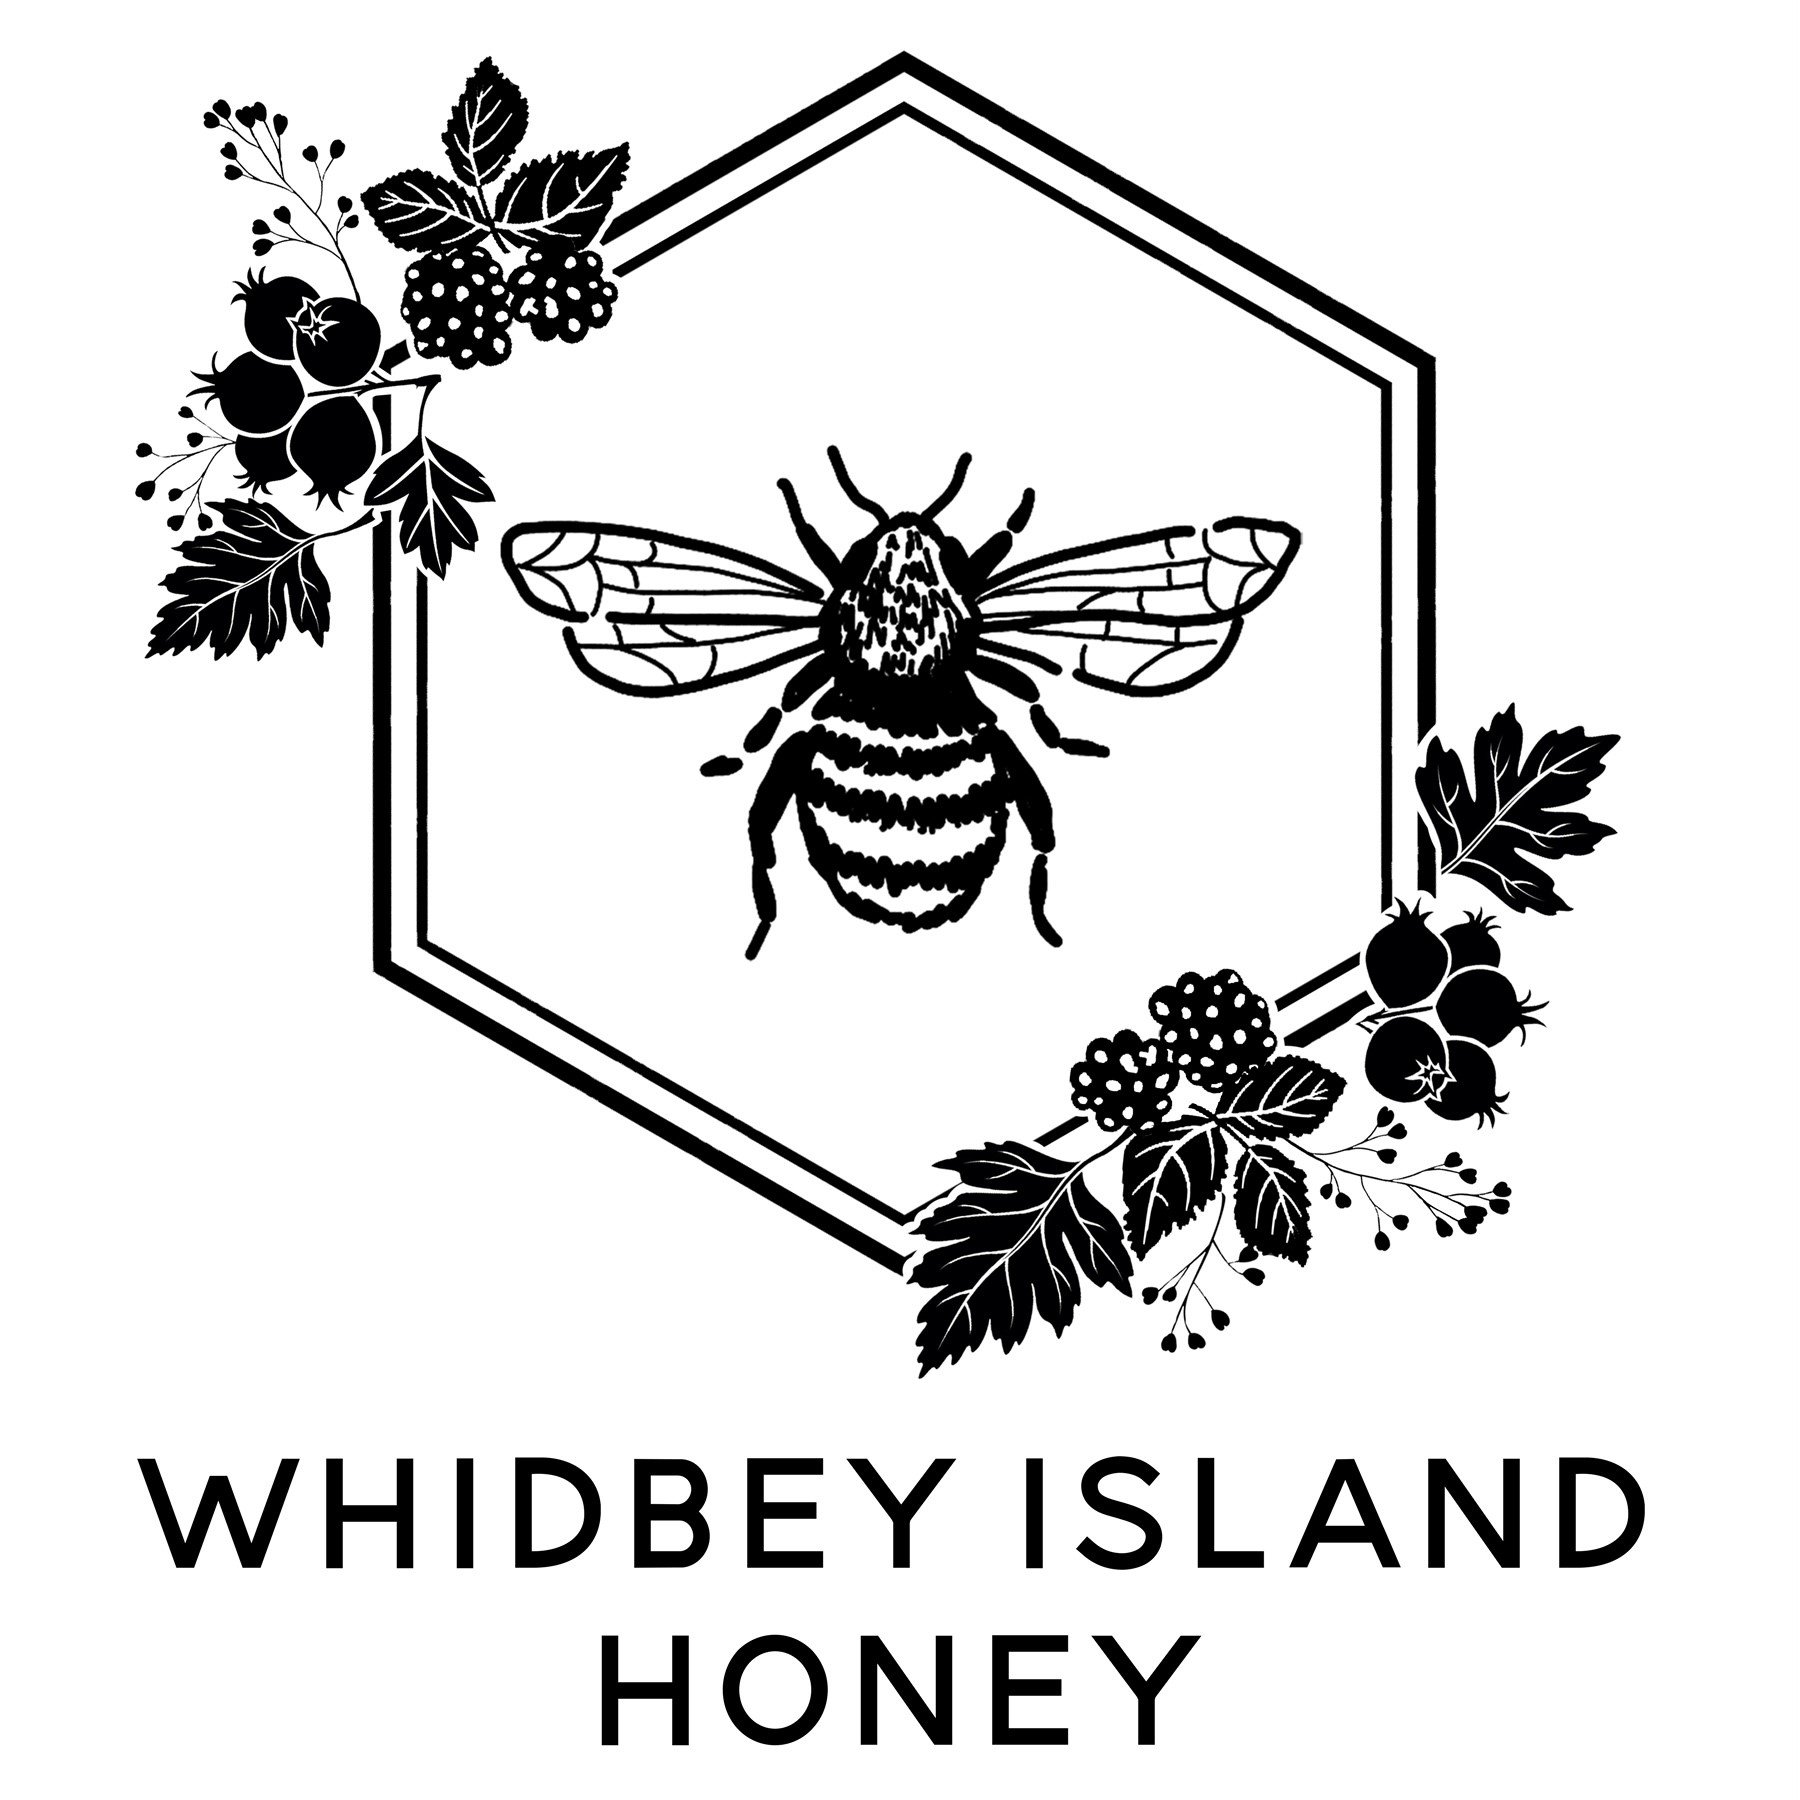 Whidbey Island Honey — Fainting Goat Farms